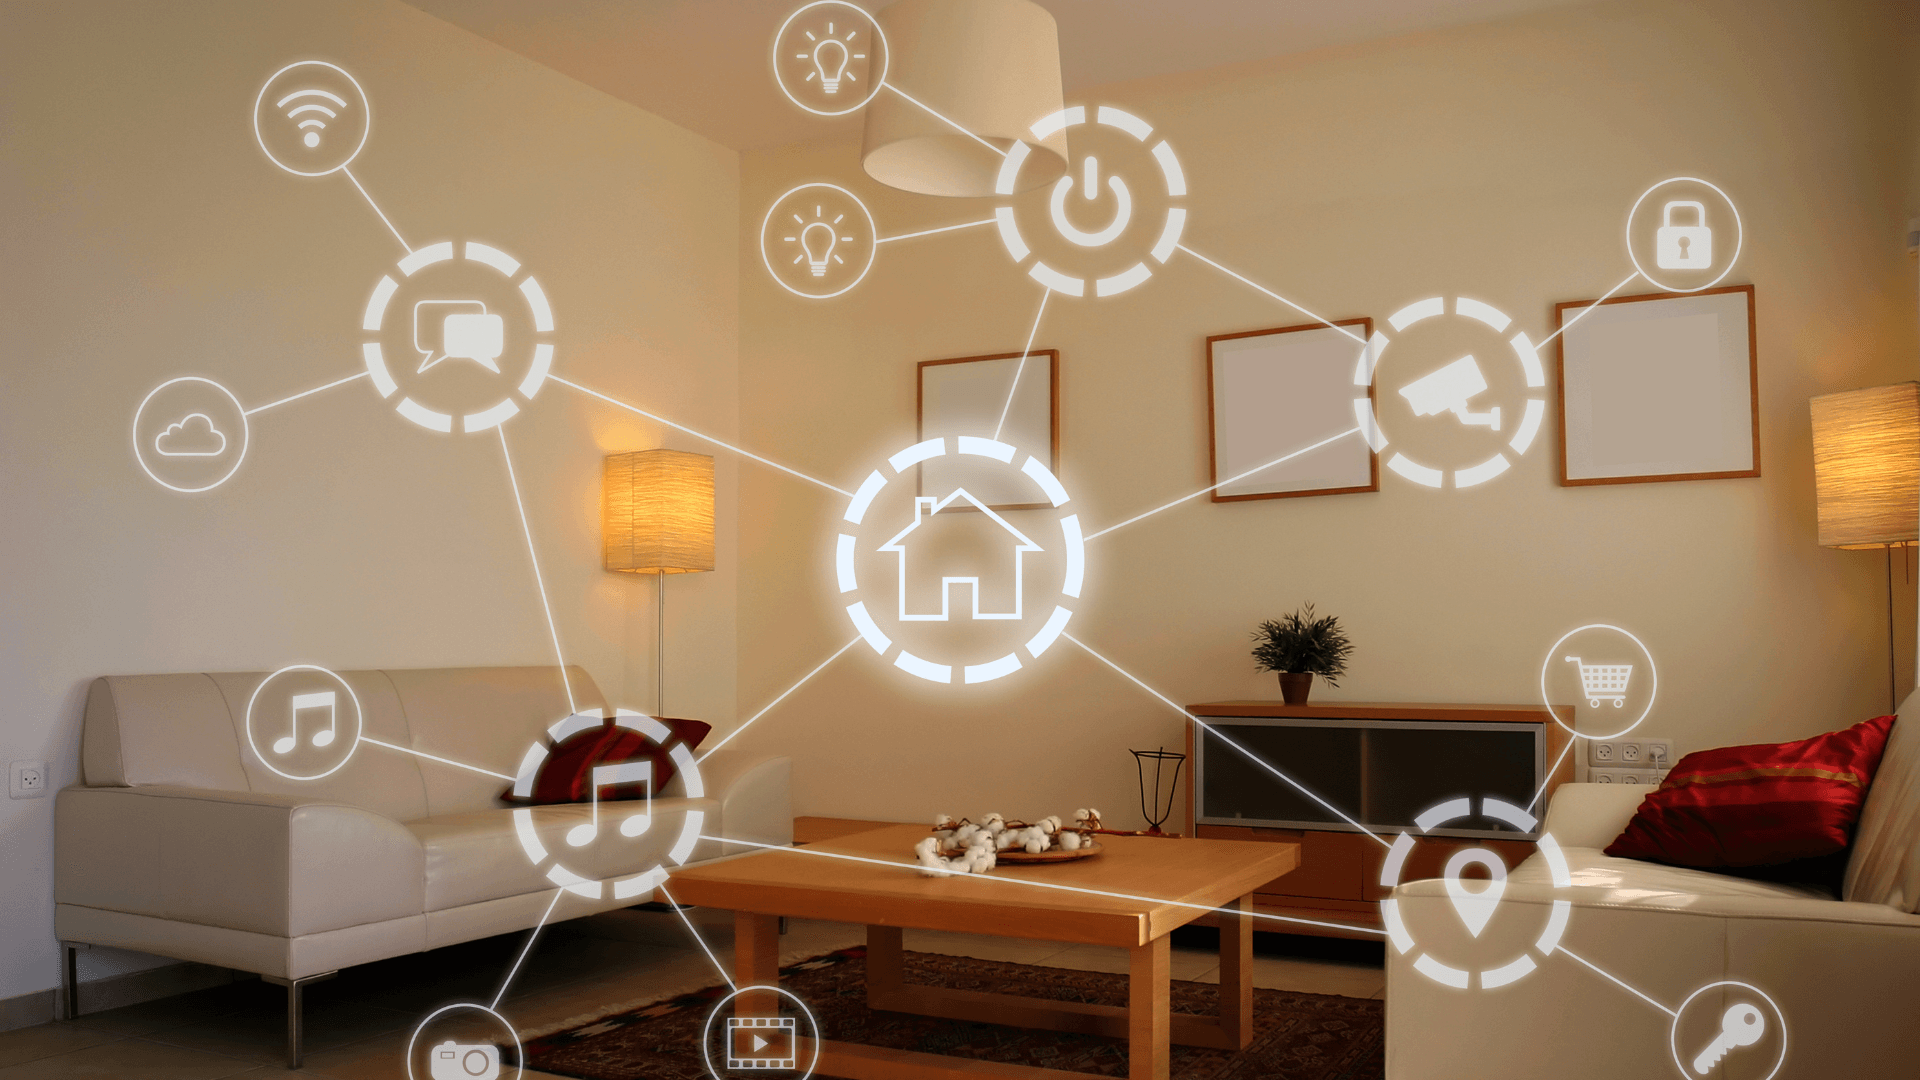 IoT applications for Smart Home